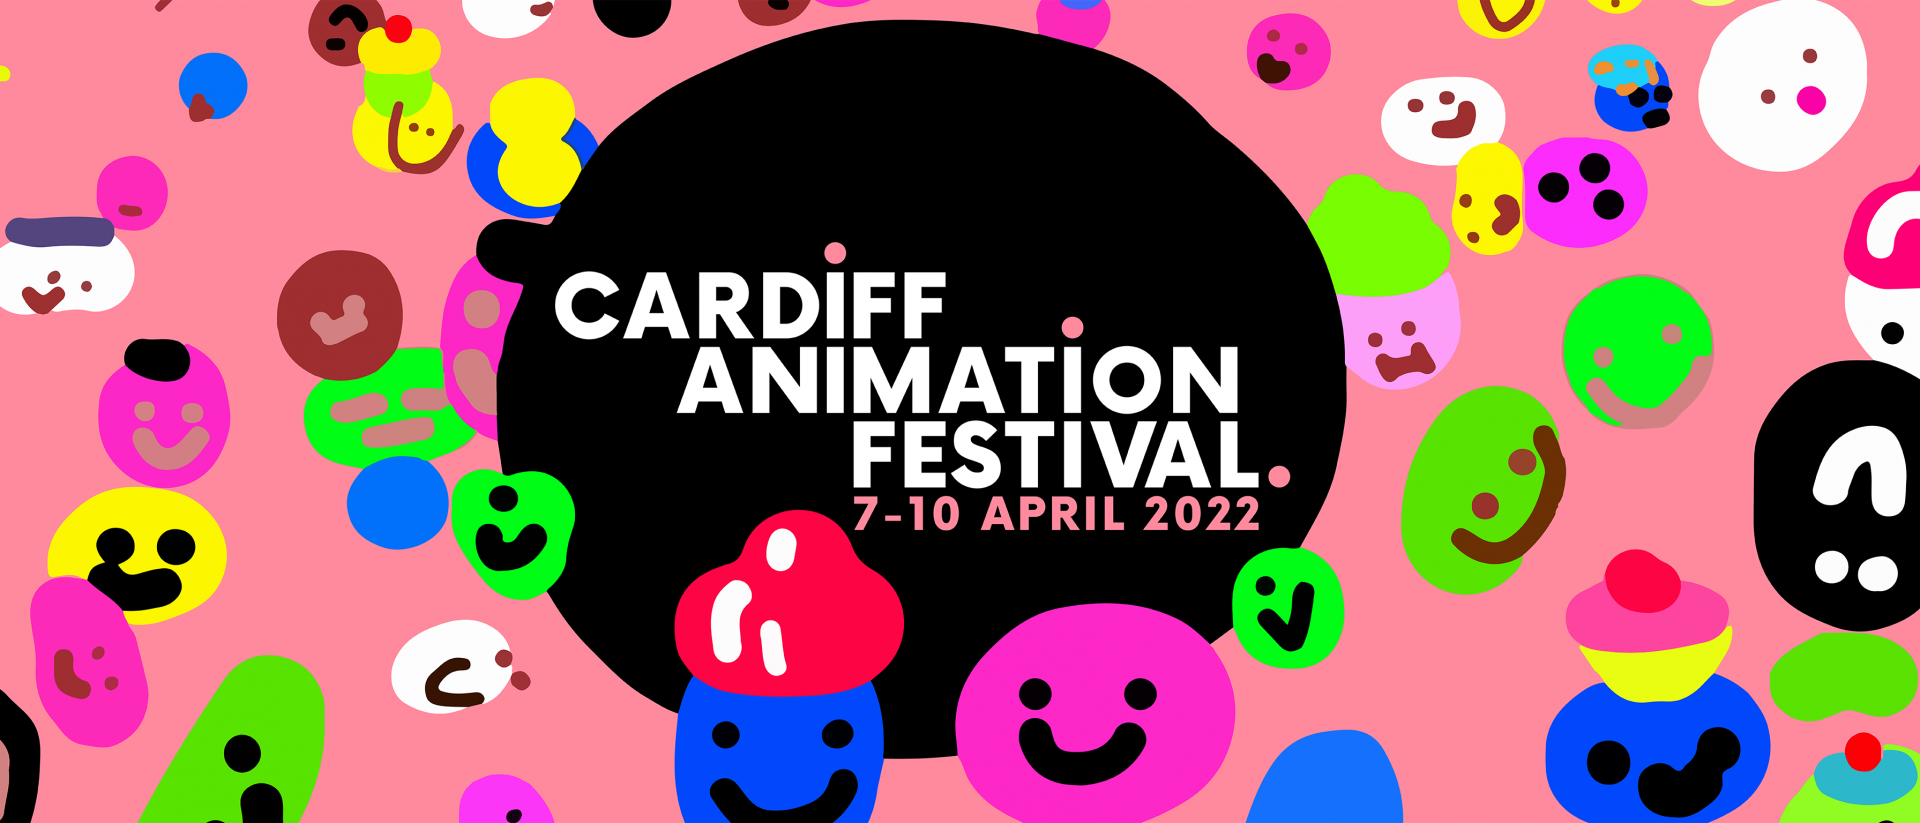 poster for cardiff animation festival 2022